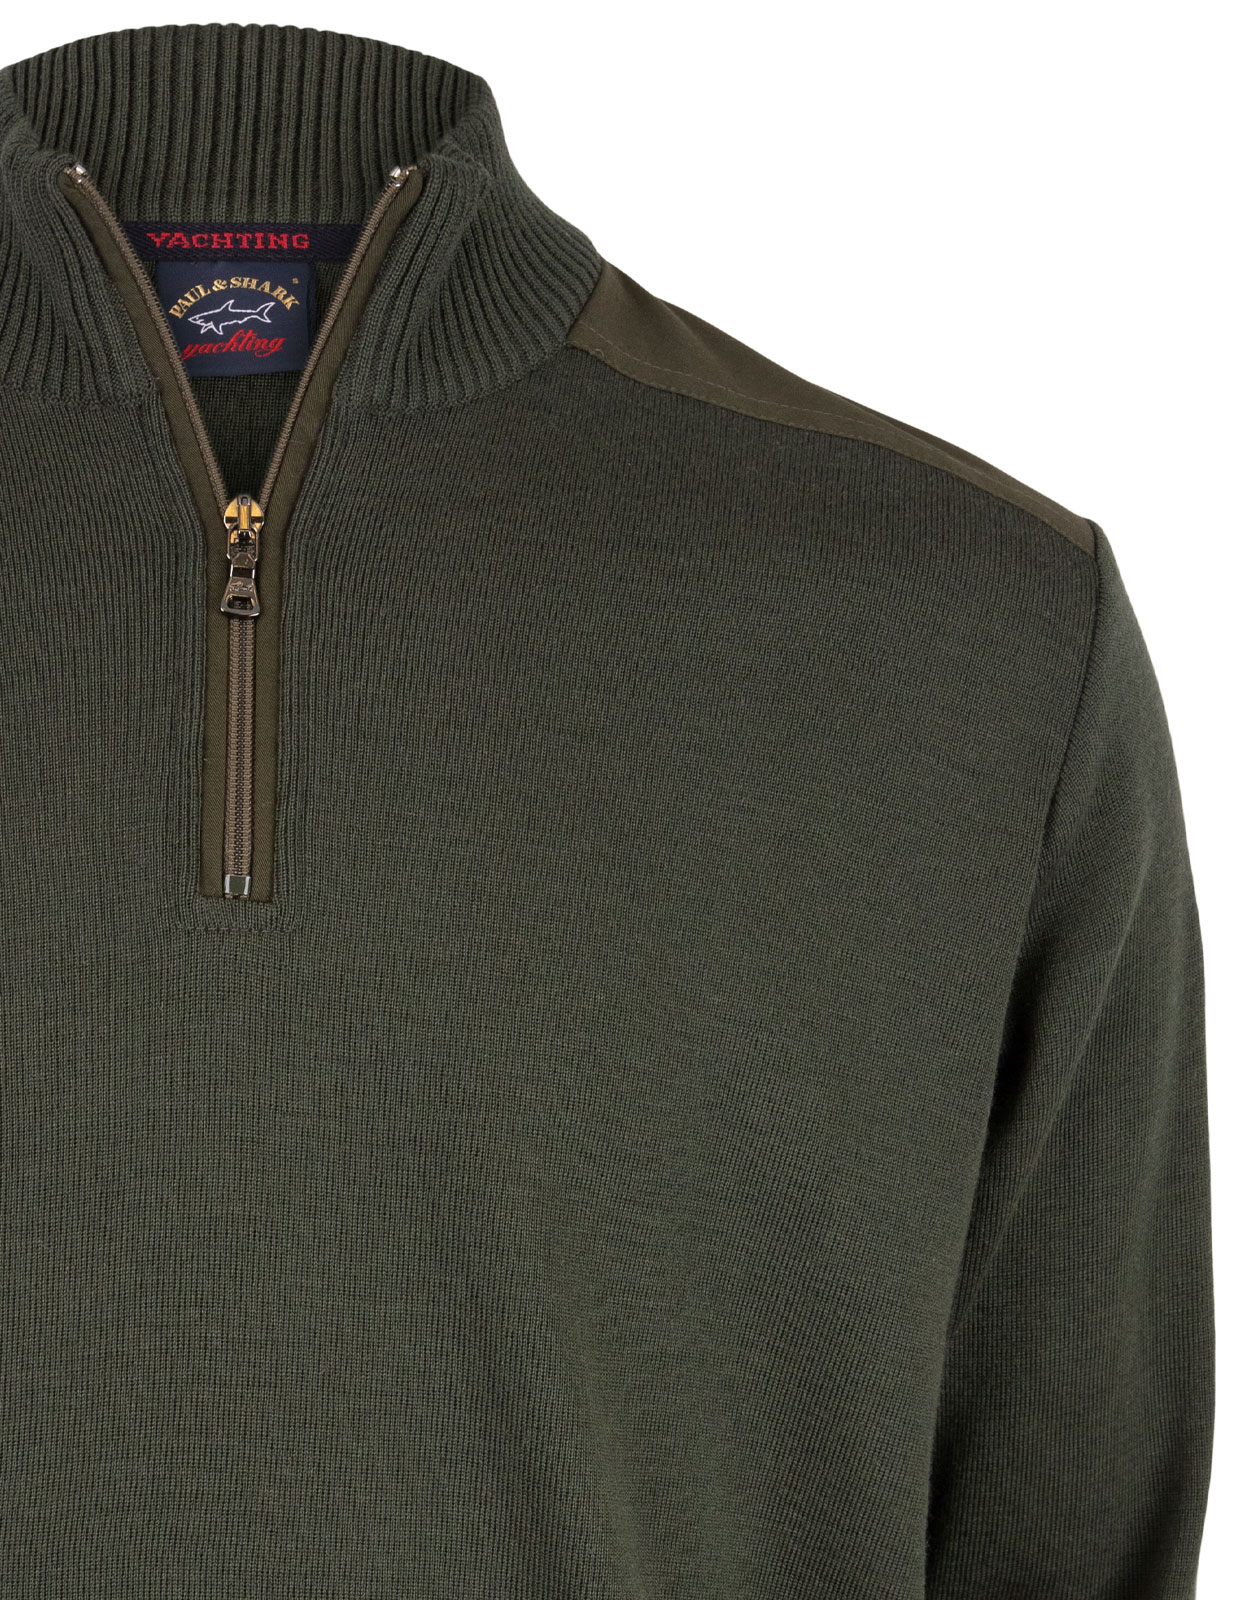 Yachting Wool Turtleneck Sweater Olive Stl XL